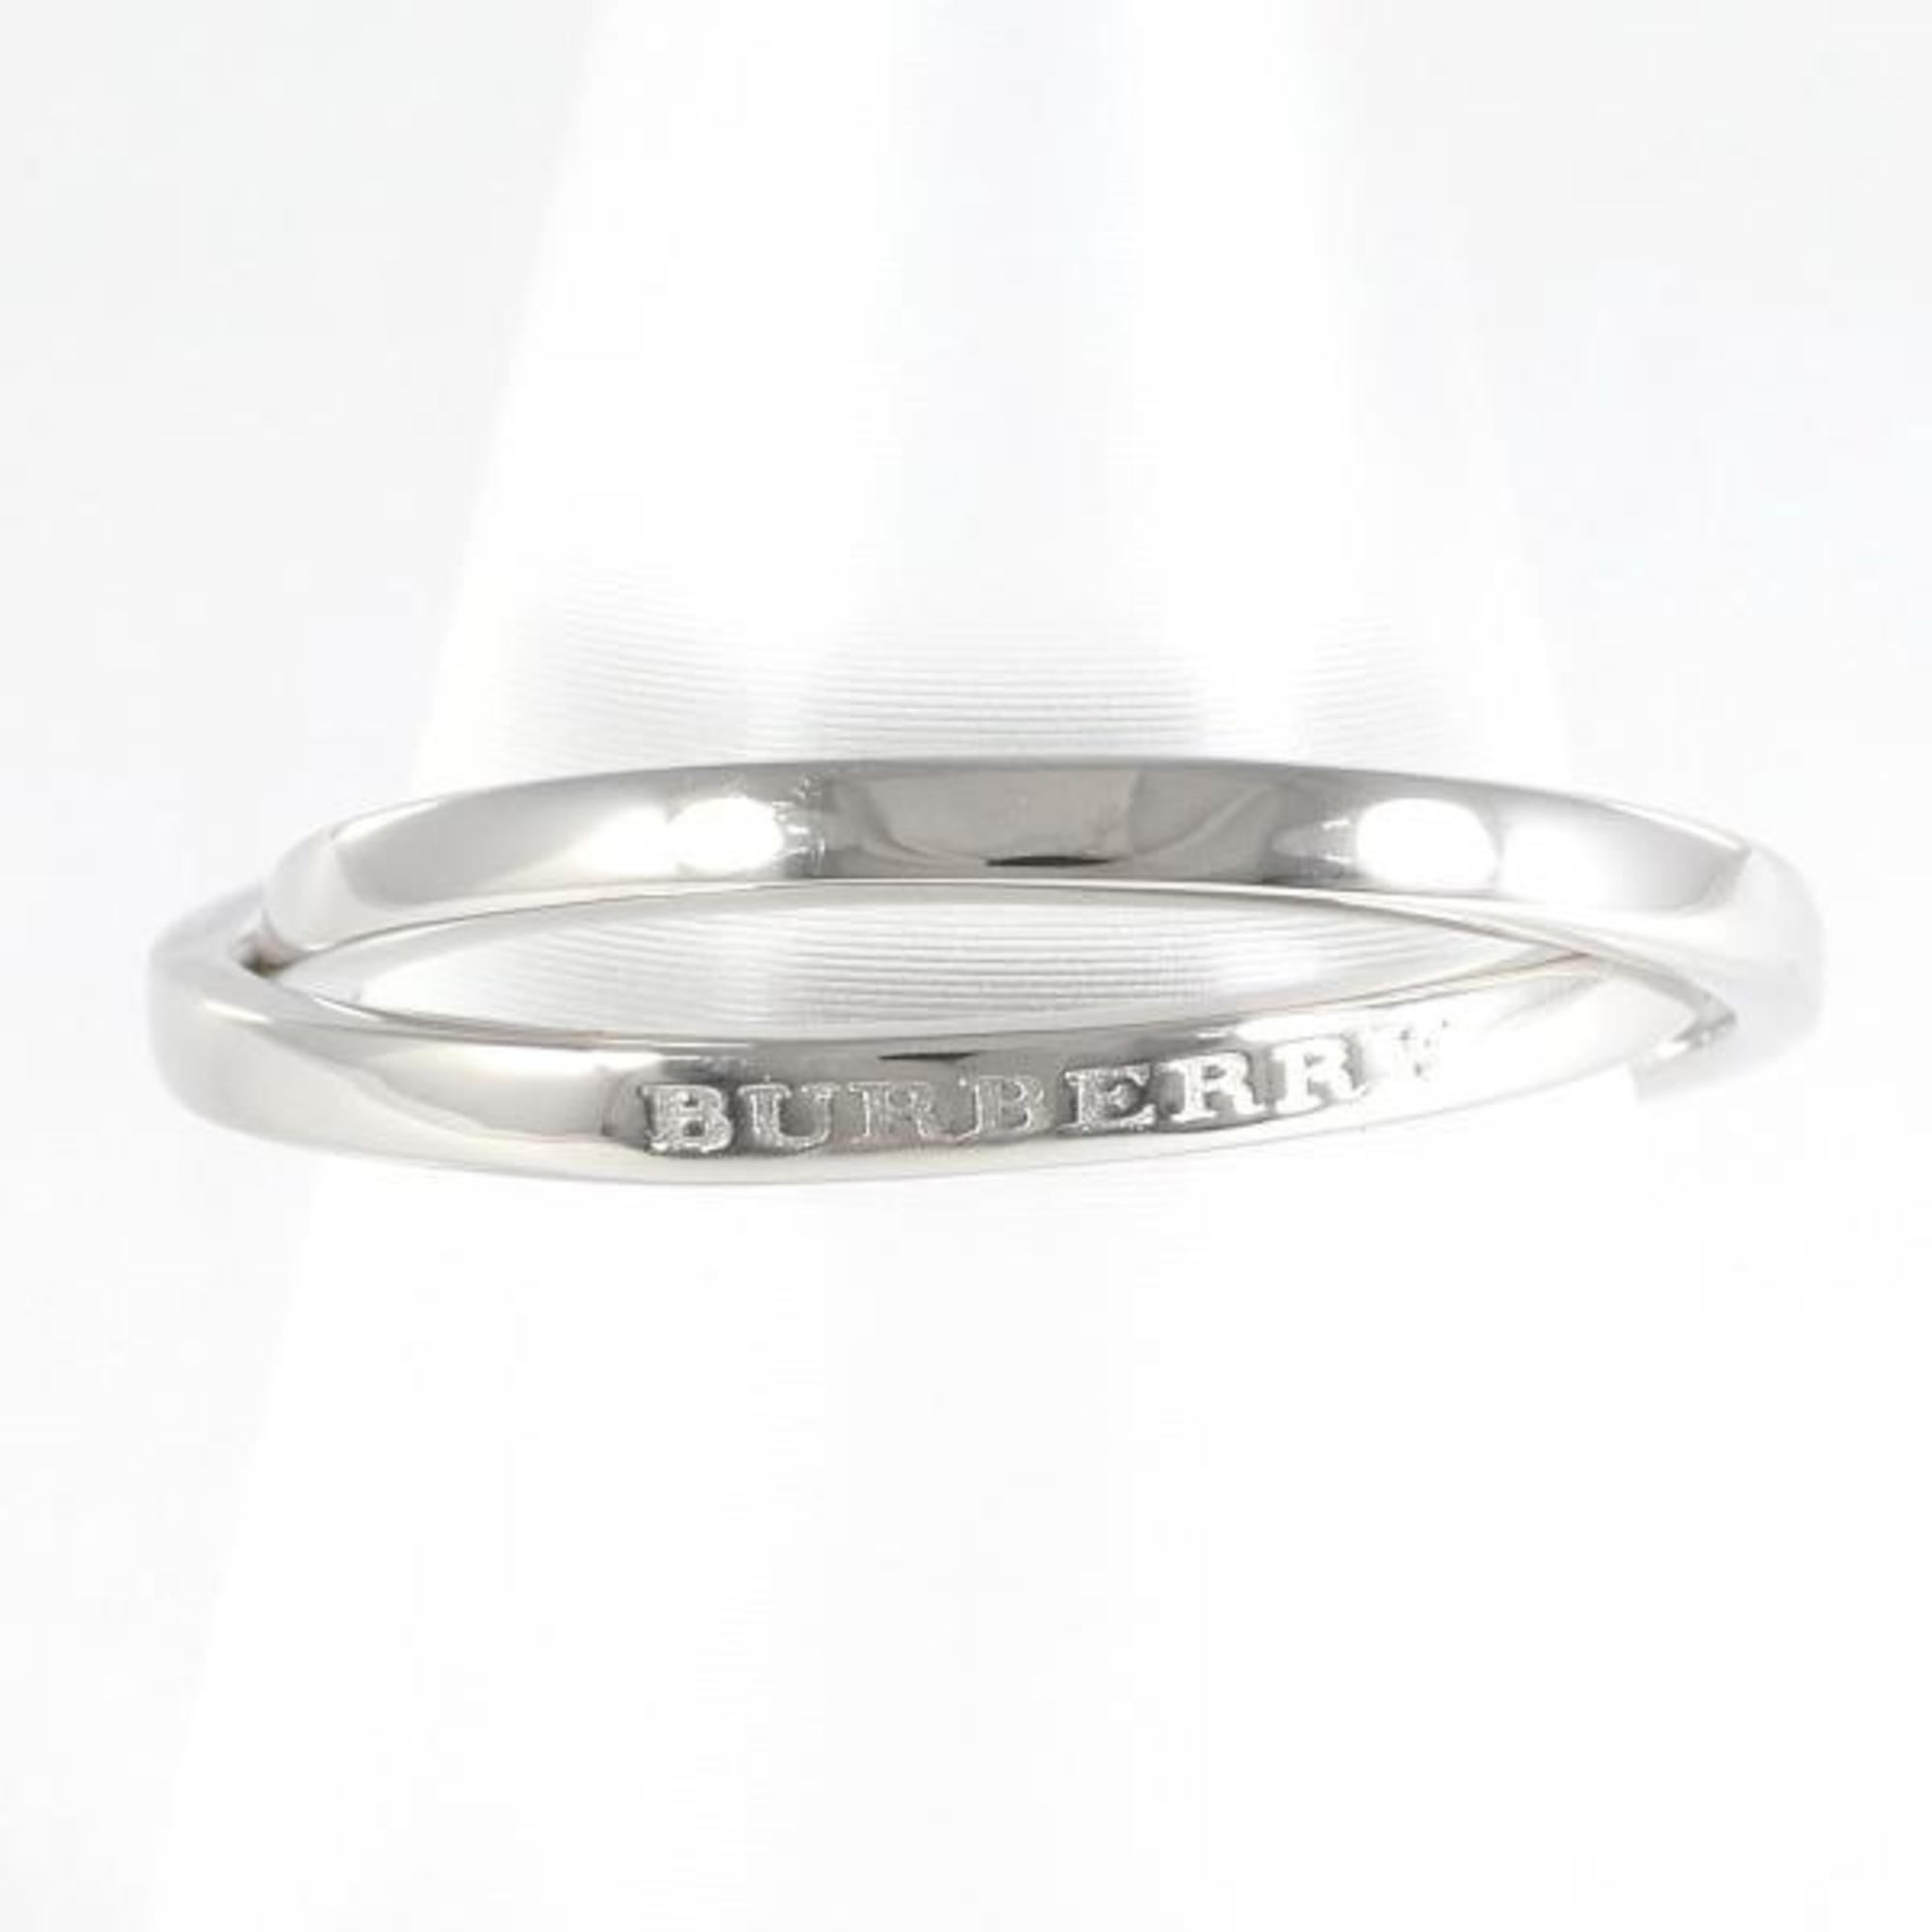 Burberry PT900 Ring No. 10 Diamond 0.02 Total Weight Approx. 4.5g Jewelry